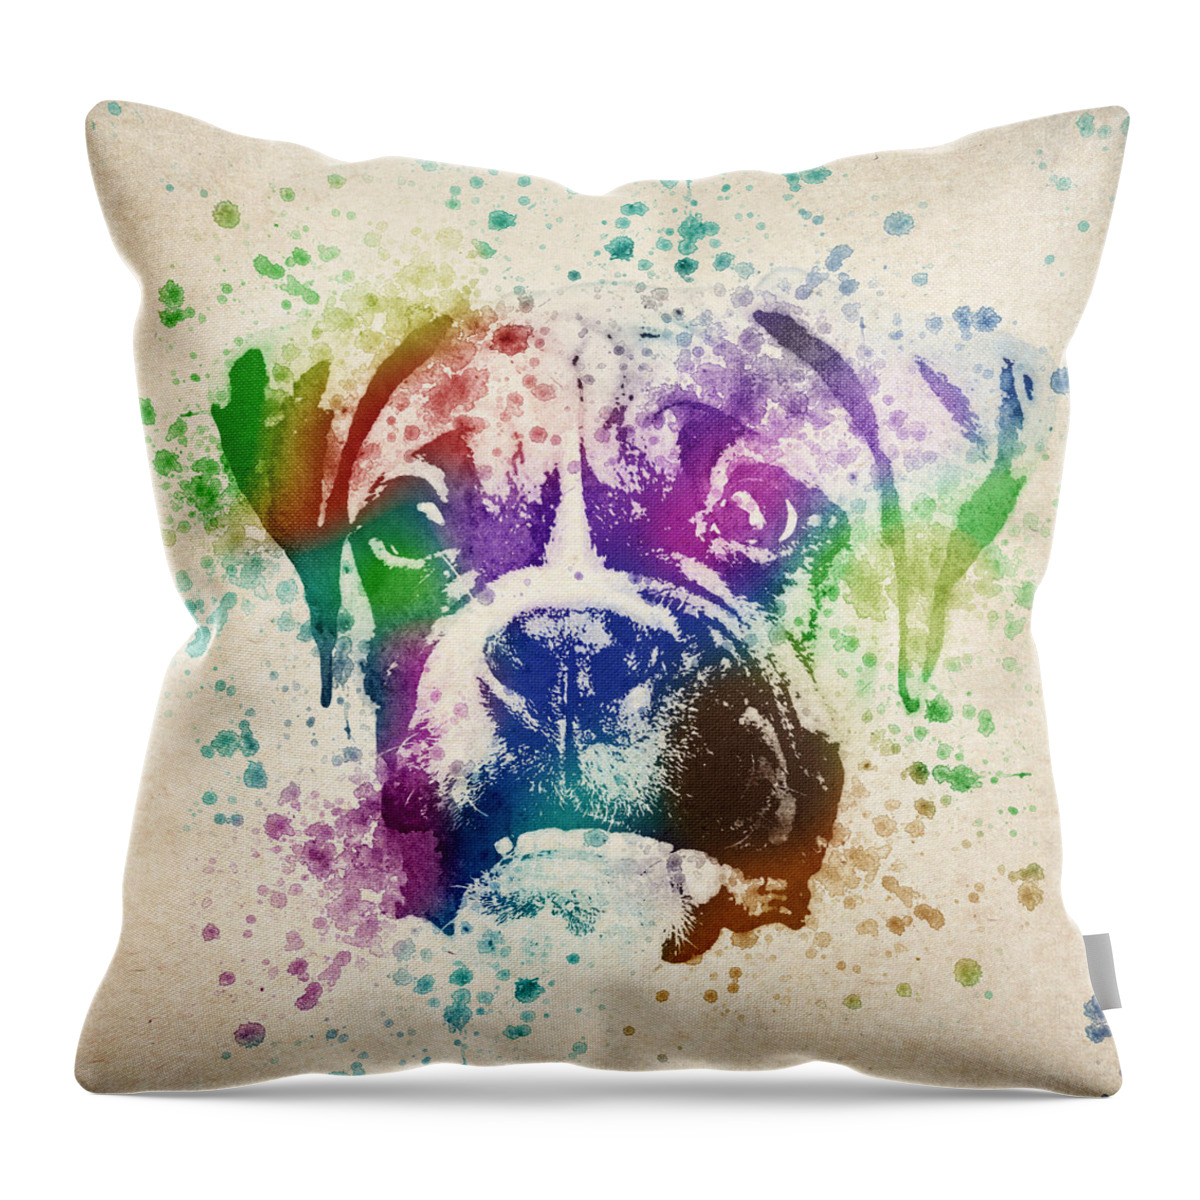 Boxer Throw Pillow featuring the digital art Boxer Splash by Aged Pixel